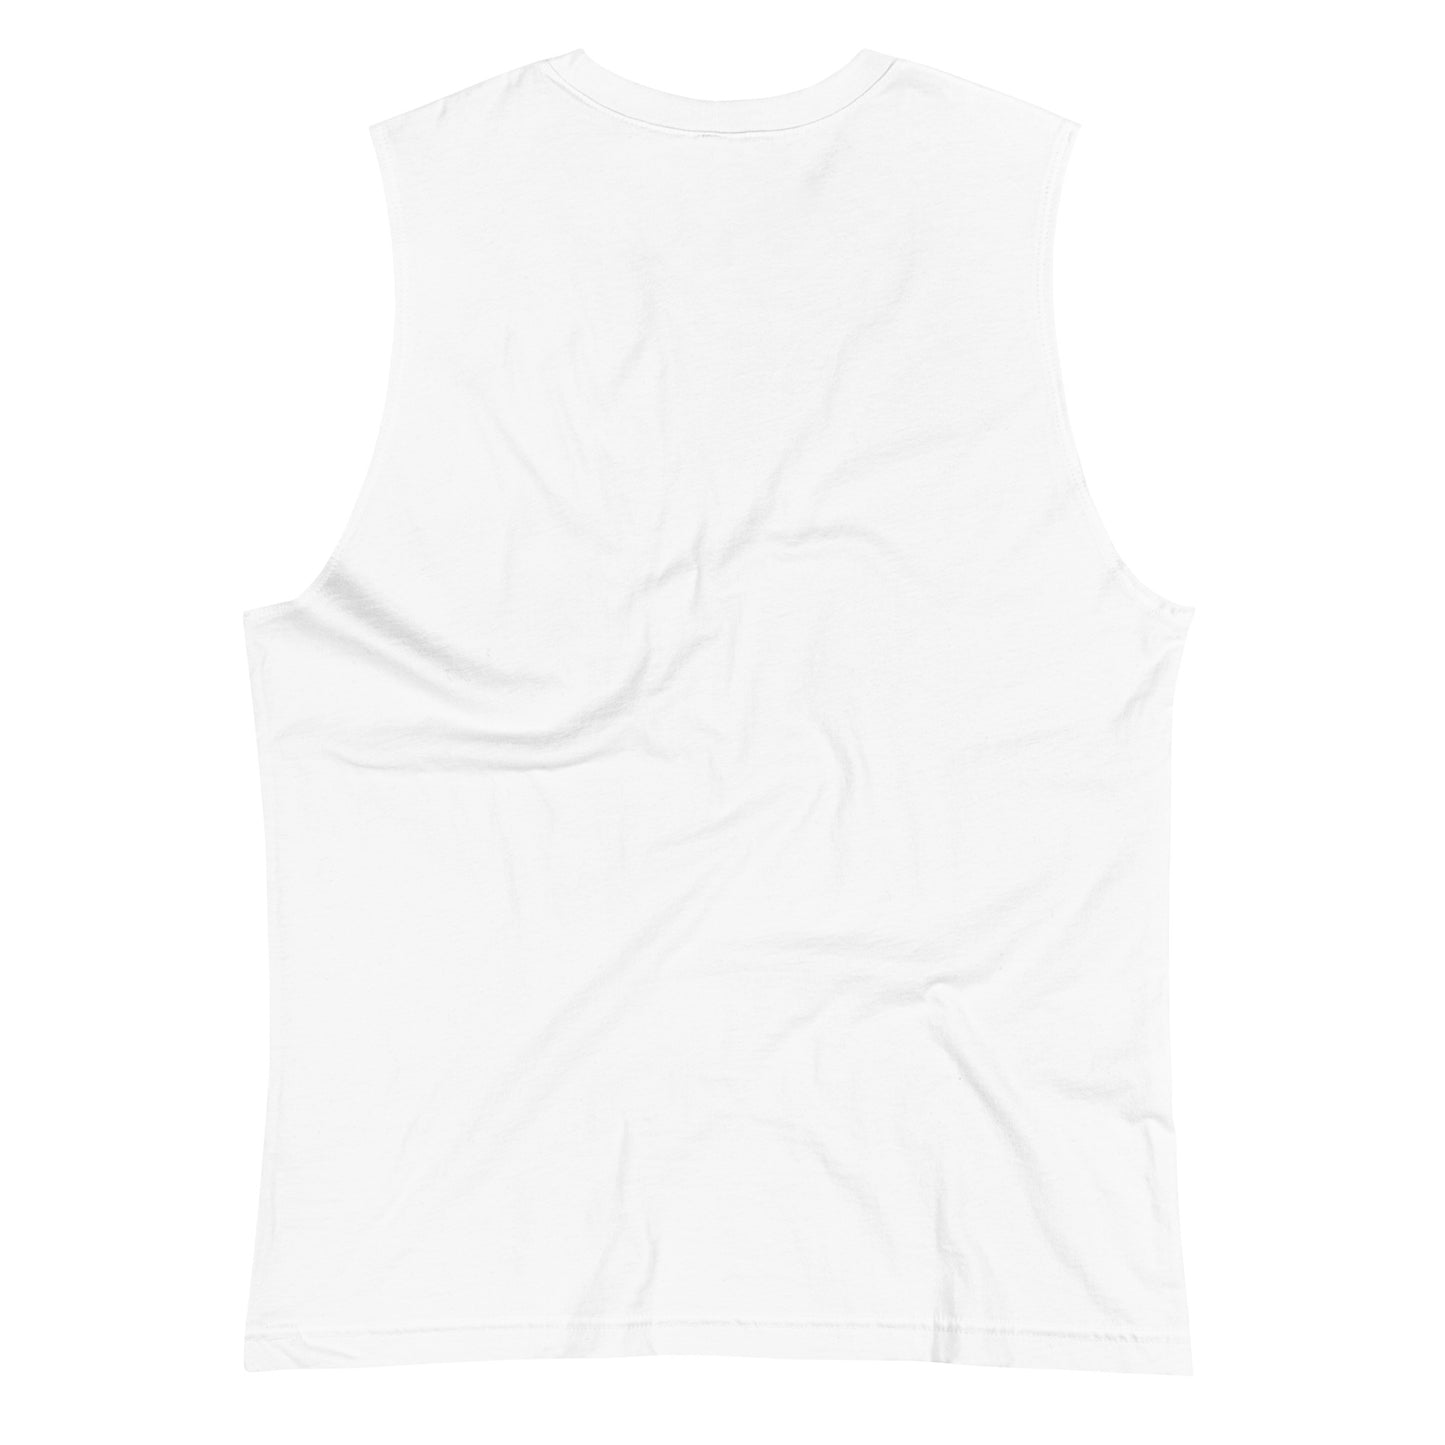 Sweet Science Sports Skater Muscle Shirt